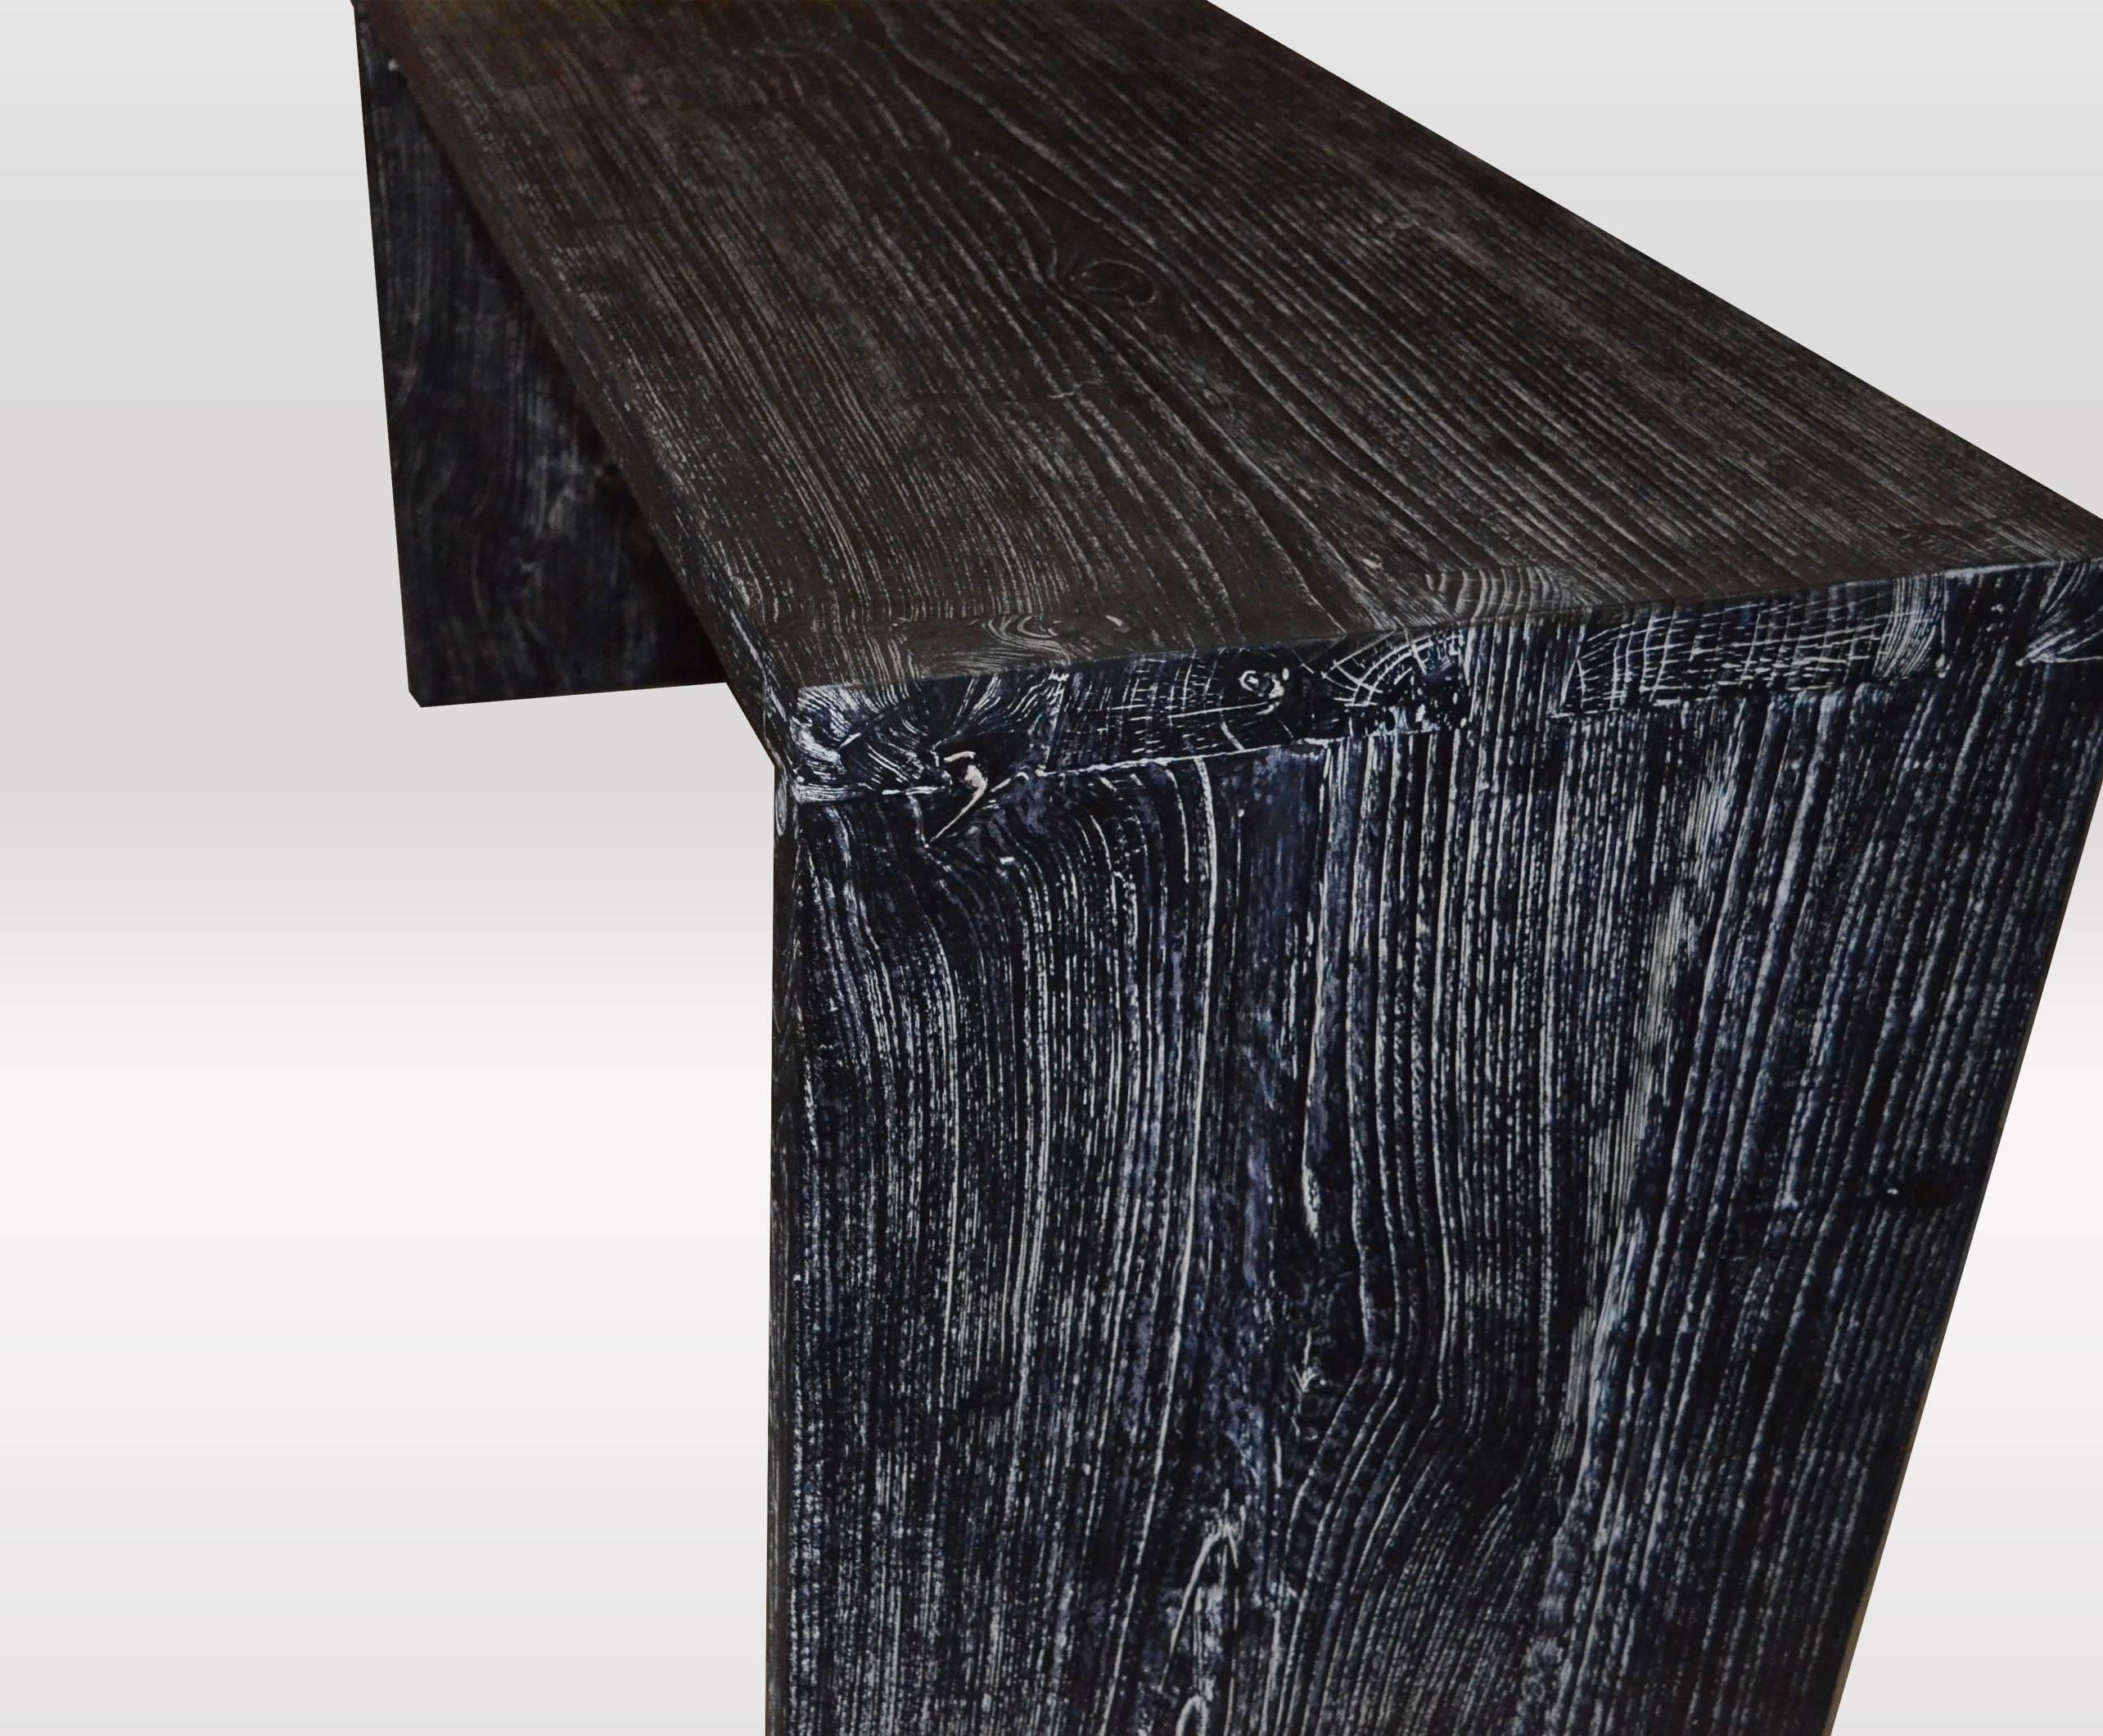 Solid teak wood console table/desk. Burnt, sanded and sealed with a cerused finish.

The Triple Burnt Collection represents a unique line of modern furniture made from solid organic wood. Burnt three times to produce a rich, charcoal finish with